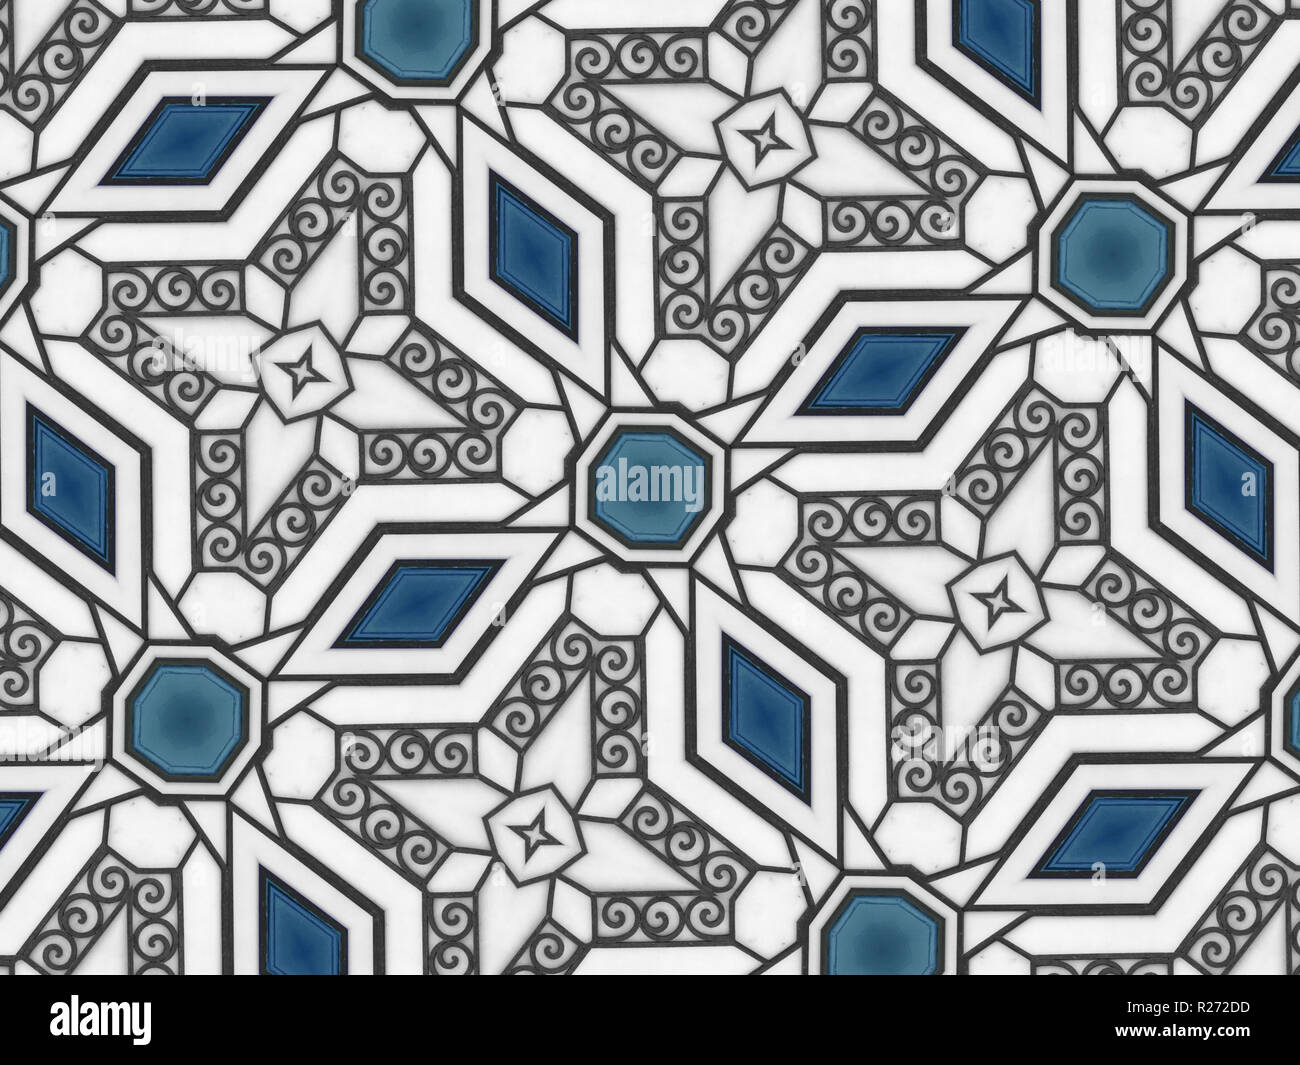 Detailed geometric pattern with blue shapes and spiral motif. Abstract background. Stock Photo